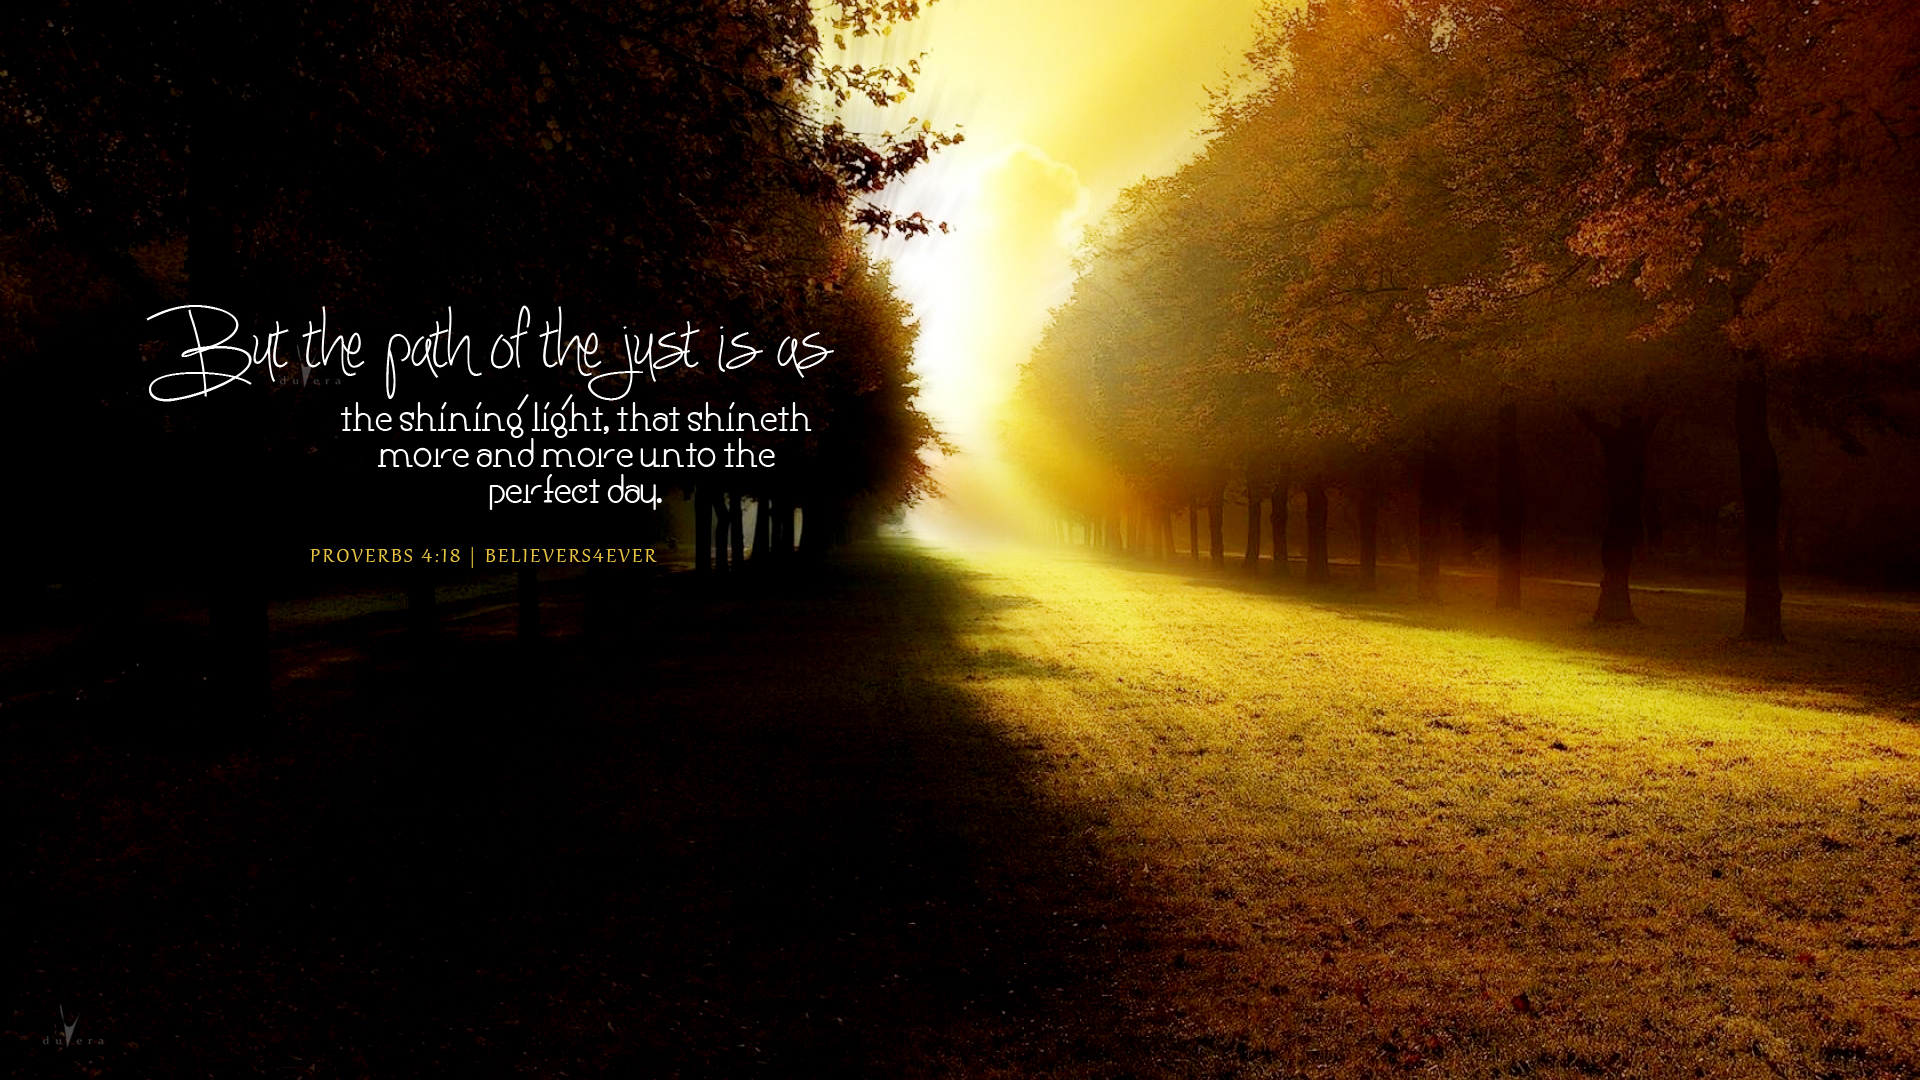 Christian Wallpapers   HD Wallpapers Backgrounds of Your